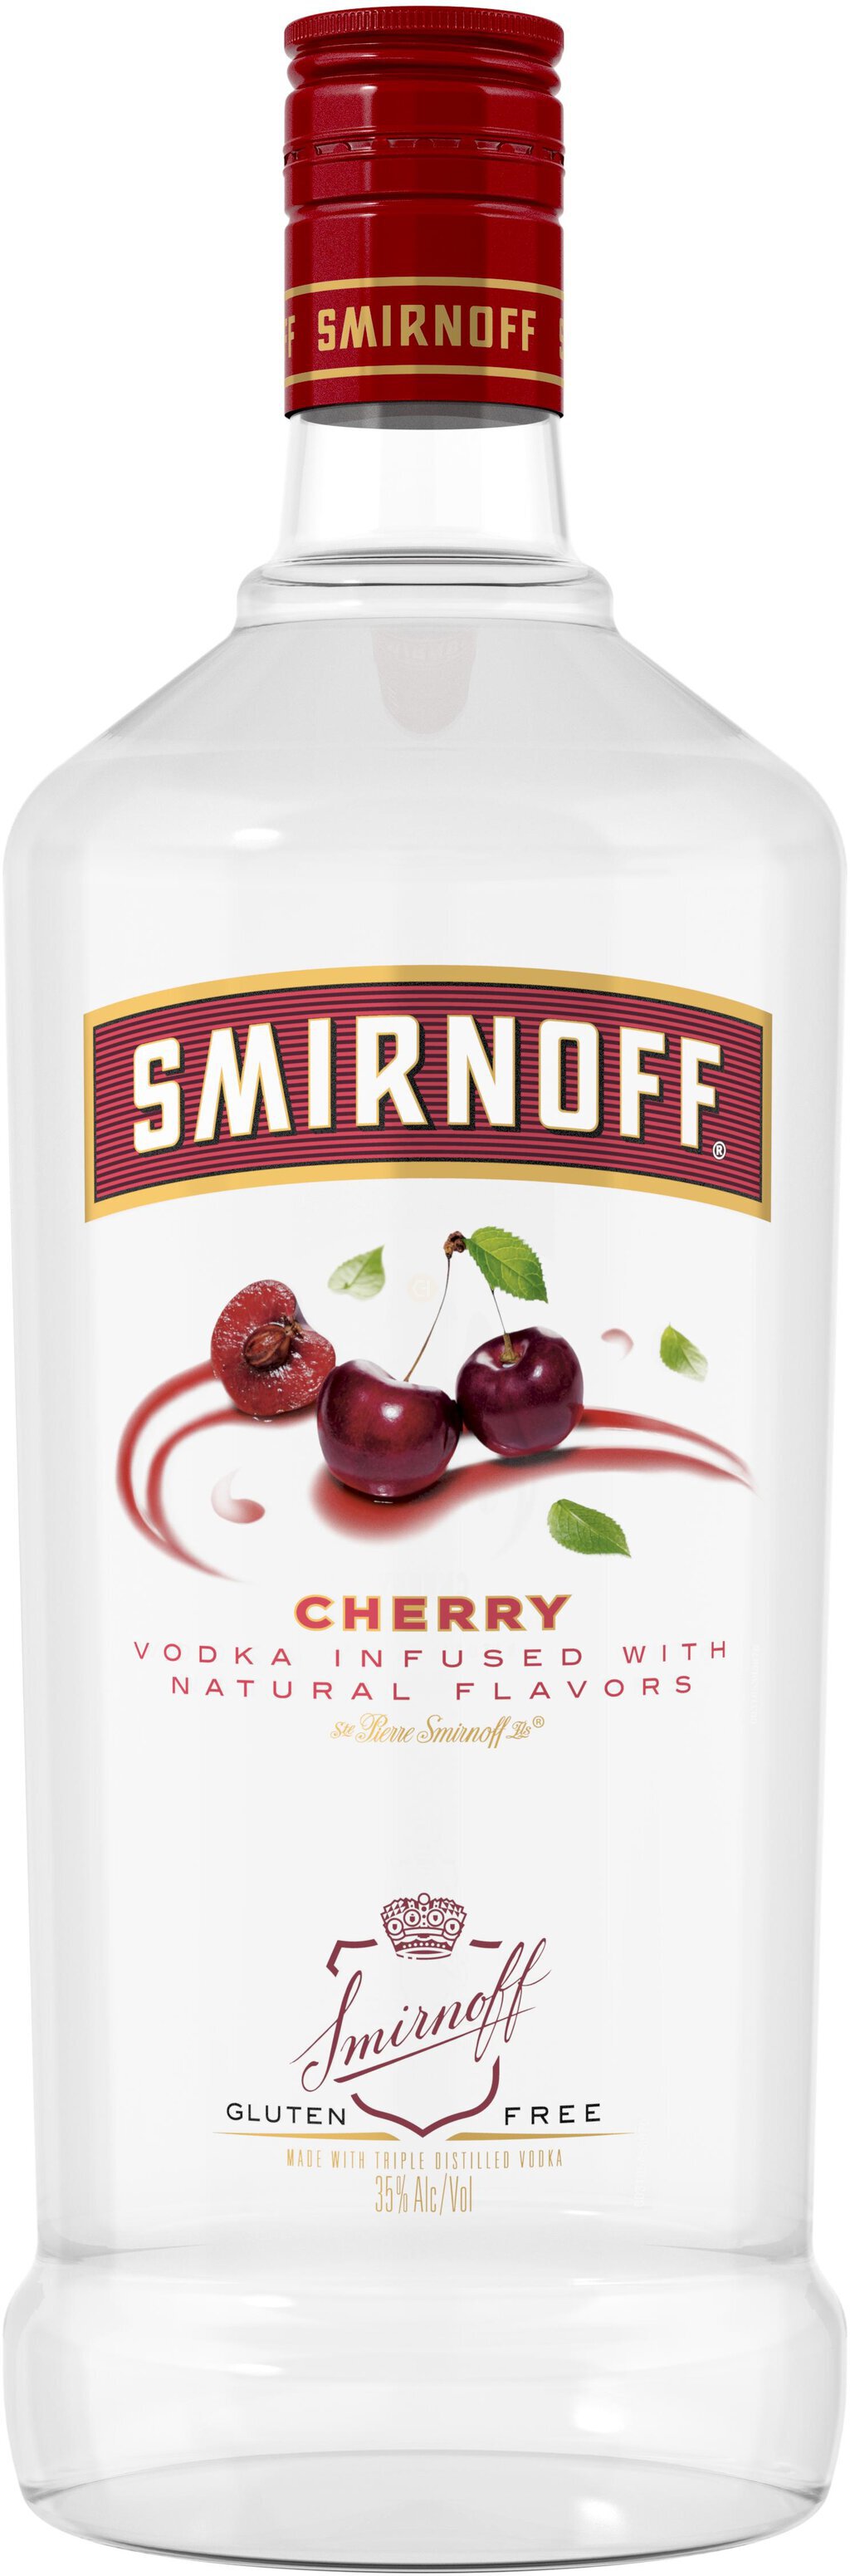 SMIRNOFF Cherry (Vodka Infused With Natural Flavors)